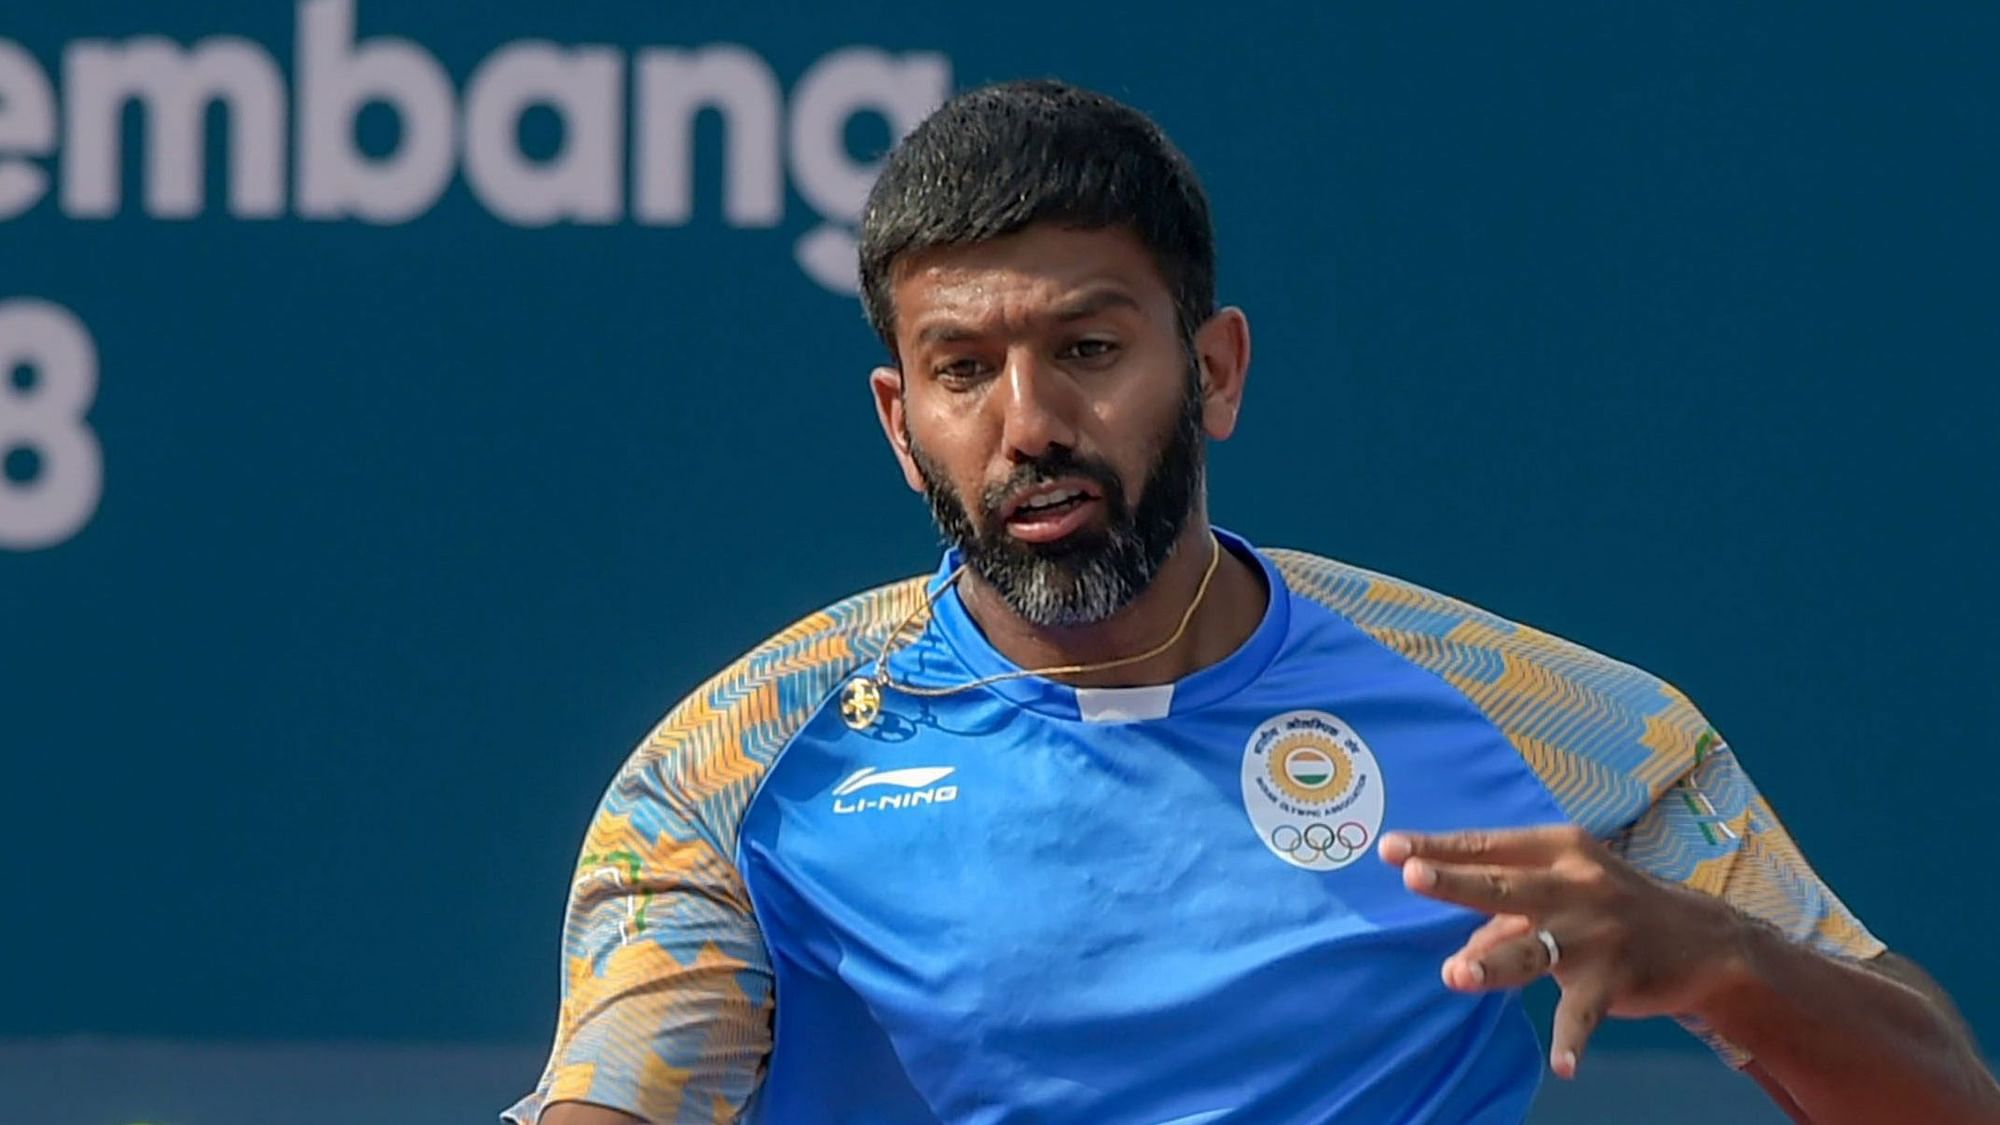 The Indian challenge at the Australian Open ended after Rohan Bopanna and his Ukrainian partner Nadiia Kichenok were knocked out in straight sets in the quarterfinal of the mixed doubles event on Thursday, 30 January.